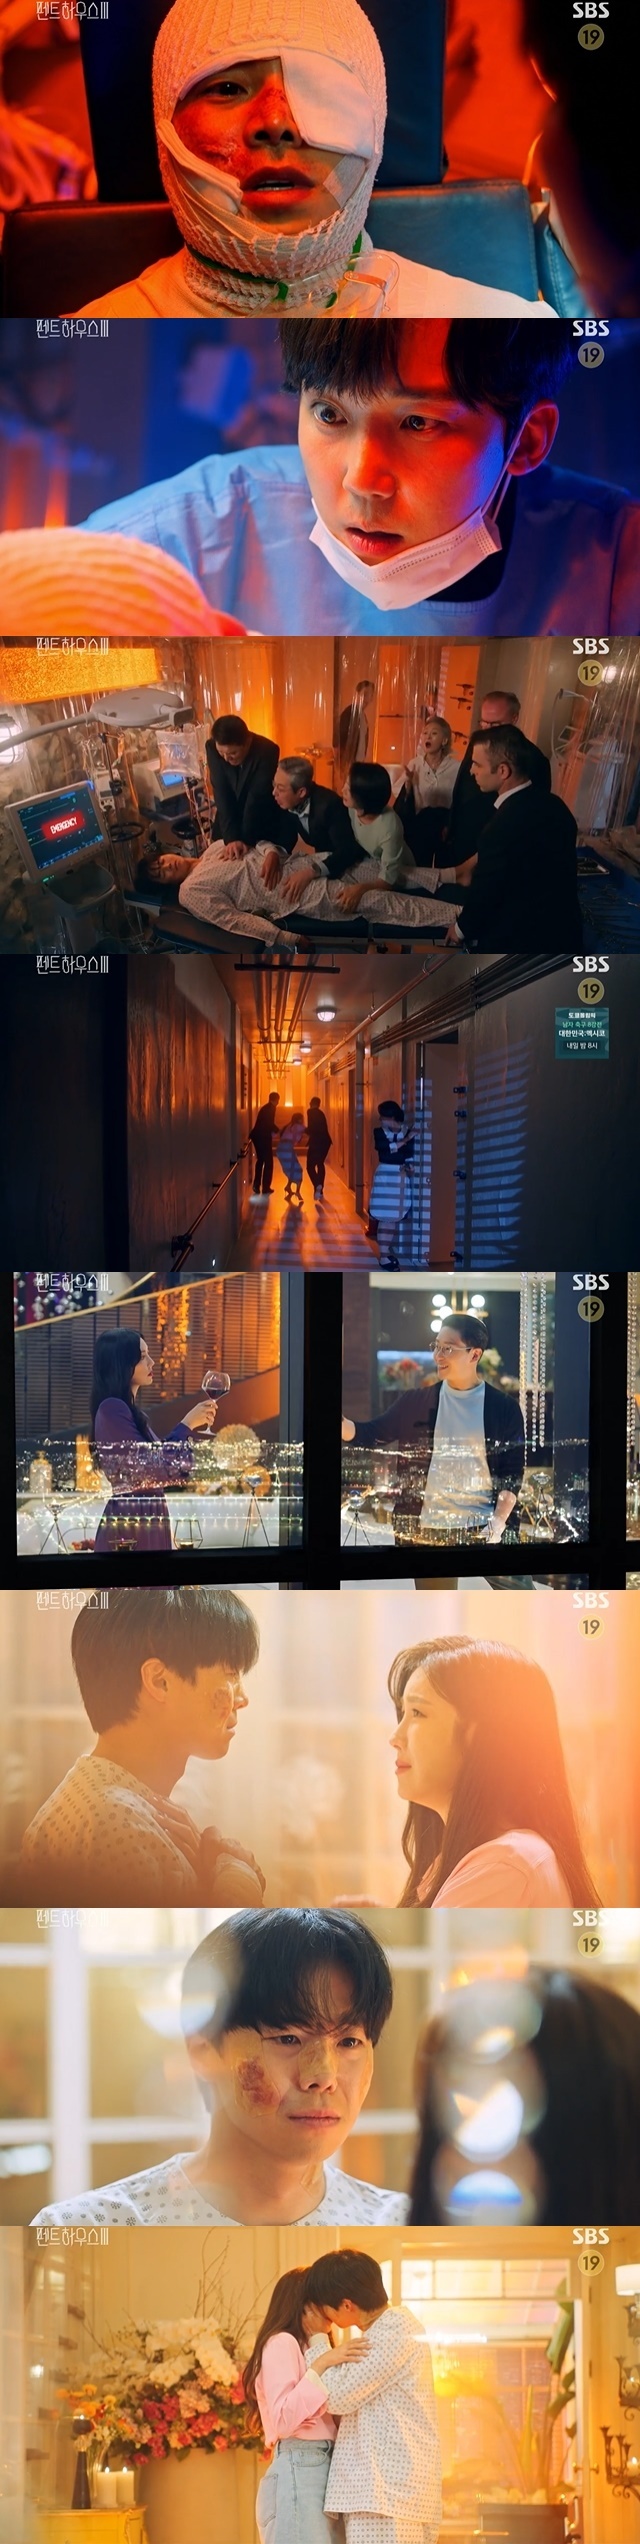 Park Eun-suk, who succeeded in Risen by tricking Kim So-yeon, shared a tearful The Slap kiss with Lee Ji-ah.In addition, revenge, which combined the power of the two, was restarted.In the 8th episode of SBS Friday drama Penthouse (played by Kim Soon-ok, directed by Ju Dong-min), which was broadcast on July 30, the endless evil acts of Chun Seo-jin (Kim So-yeon) and the crisis of the heart training (Lee Ji-ah) were drawn.On this day, Chun Seo-jin told Ju Dan-tae (Mr. Eom Ki-jun) that Shim Soo-ryeon was working as a bar namadam for revenge, and he made one trick.He tried to get Shim Soo-ryun down from the chairmans office by anonymously reporting this fact to the board of directors of the Cheonga Foundation.But the work has not been easy, as the heart train has already erased all CCTVs in the bar.So, Chun Seo-jin tried to keep his hidden Logani (Park Eun-suk) and his identity hidden, and to keep Lee Yong-sung (Yoon Jong-hoon), to keep his hands on Baek Joon-ki (Onjuwan), and to keep the main stage of strategic contract and marriage in long term.Previously, Chun Seo-jin told Ha Yoon-chul, Logani is delirious. He is talking nonsense and is in bad condition. I do not know what will happen right now.As Baek Jun Ki was caught gambling his life to Logan Lees brother Alex (Park Eun-suk), he rushed to receive Logan Lees ransom.Chun Seo-jin injected Logani with a suspicious drug, saying, I will be very comfortable in 24 hours.Then, Chun Seo-jin provided Baek Jun-ki with a picture of Logan Lee lying on his body.Chun Seo-jin said that Ha Yoon-cheol, who is with Logan Lee in the photo, is working under the state recently, and that the Logan family will be confident that it is a state of affairs.But Chun Seo-jin was planning another plan behind him.Chun Seo-jin broke his promise to Baek Jun-ki and suggested that he would hold hands with Ju-tae, and laughed that it would be an opportunity to send Shim Soo-ri and Baek Jun-ki completely.After that, when Logan Lees family kidnapped him and presented his photo as evidence, he asked Logan Lees whereabouts, pretending to have discovered the letter Penthouse accidentally in the photo.As Chun Seo-jin planned, The person who has Logan now is a deep-stakes person. She put it all on me.The people who brought Baek Jun Ki and the people who asked Baek Jun Ki to install the bomb were all hearts. Similar visual cardiology was lured to the back of the Penthouse, passing on the trick of a suspicious helper.And when Shim Soo-ryun could not confirm the face of the person lying in the place, Logans family and the mainstay came.Judan Tae prevented the mental training from making any explanation and said, I was completely deceived by a poor Logan.Eventually, Shim was imprisoned in a villa, falsely accused of causing Logani a terrible pain, who muttered to himself, I loved Logan in extreme sadness.The door next to the villa was opened, where Logan Lee, who had been found by his family earlier and was taken to the hospital, was sitting in a wheelchair.Even though he can walk to the right foot, he walked directly to the cardiologist and kissed him, I wanted to see.